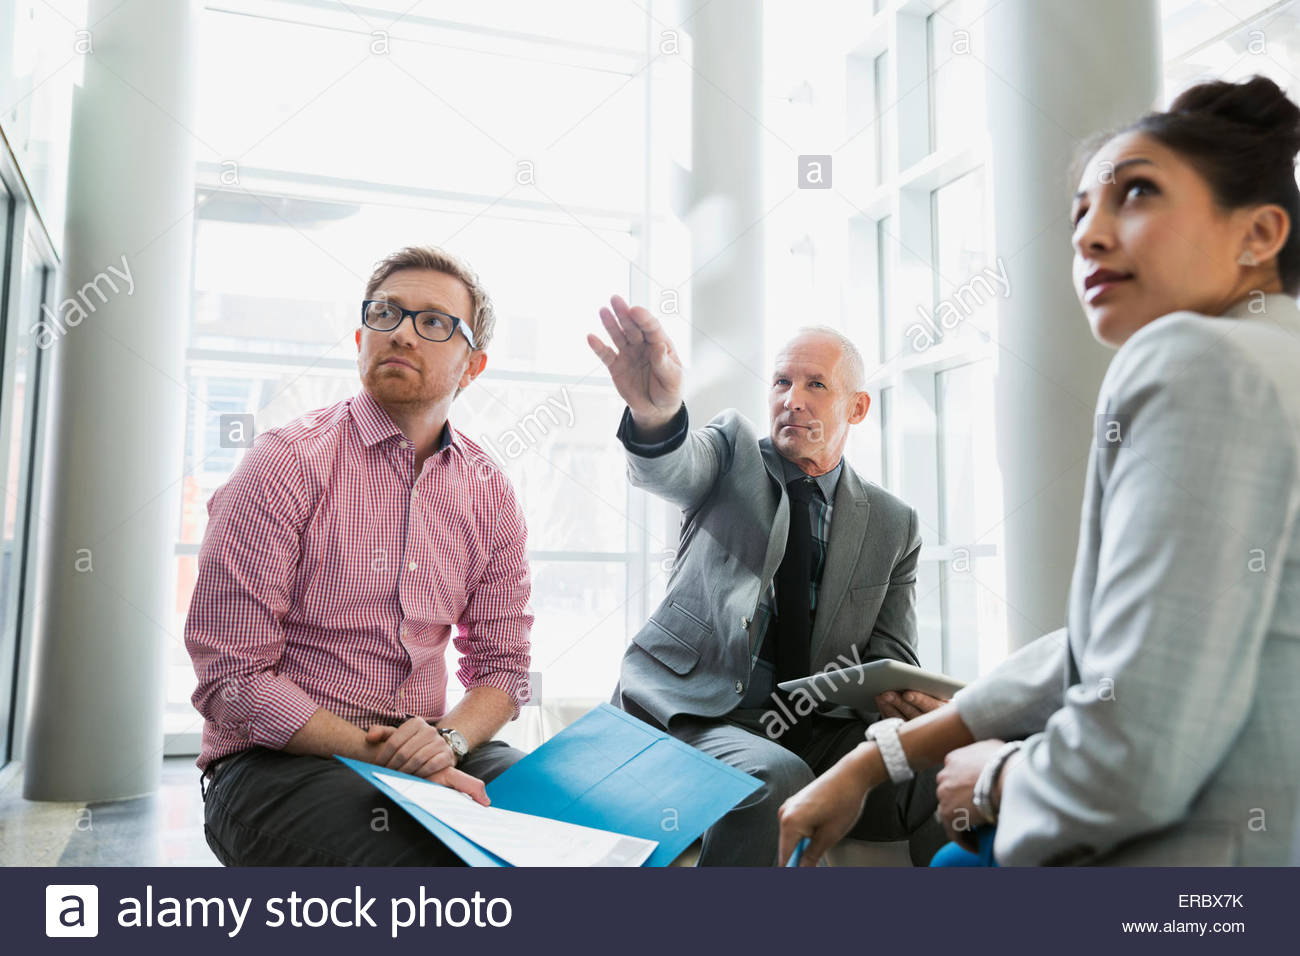 Business people meeting in lobby Stock Photo